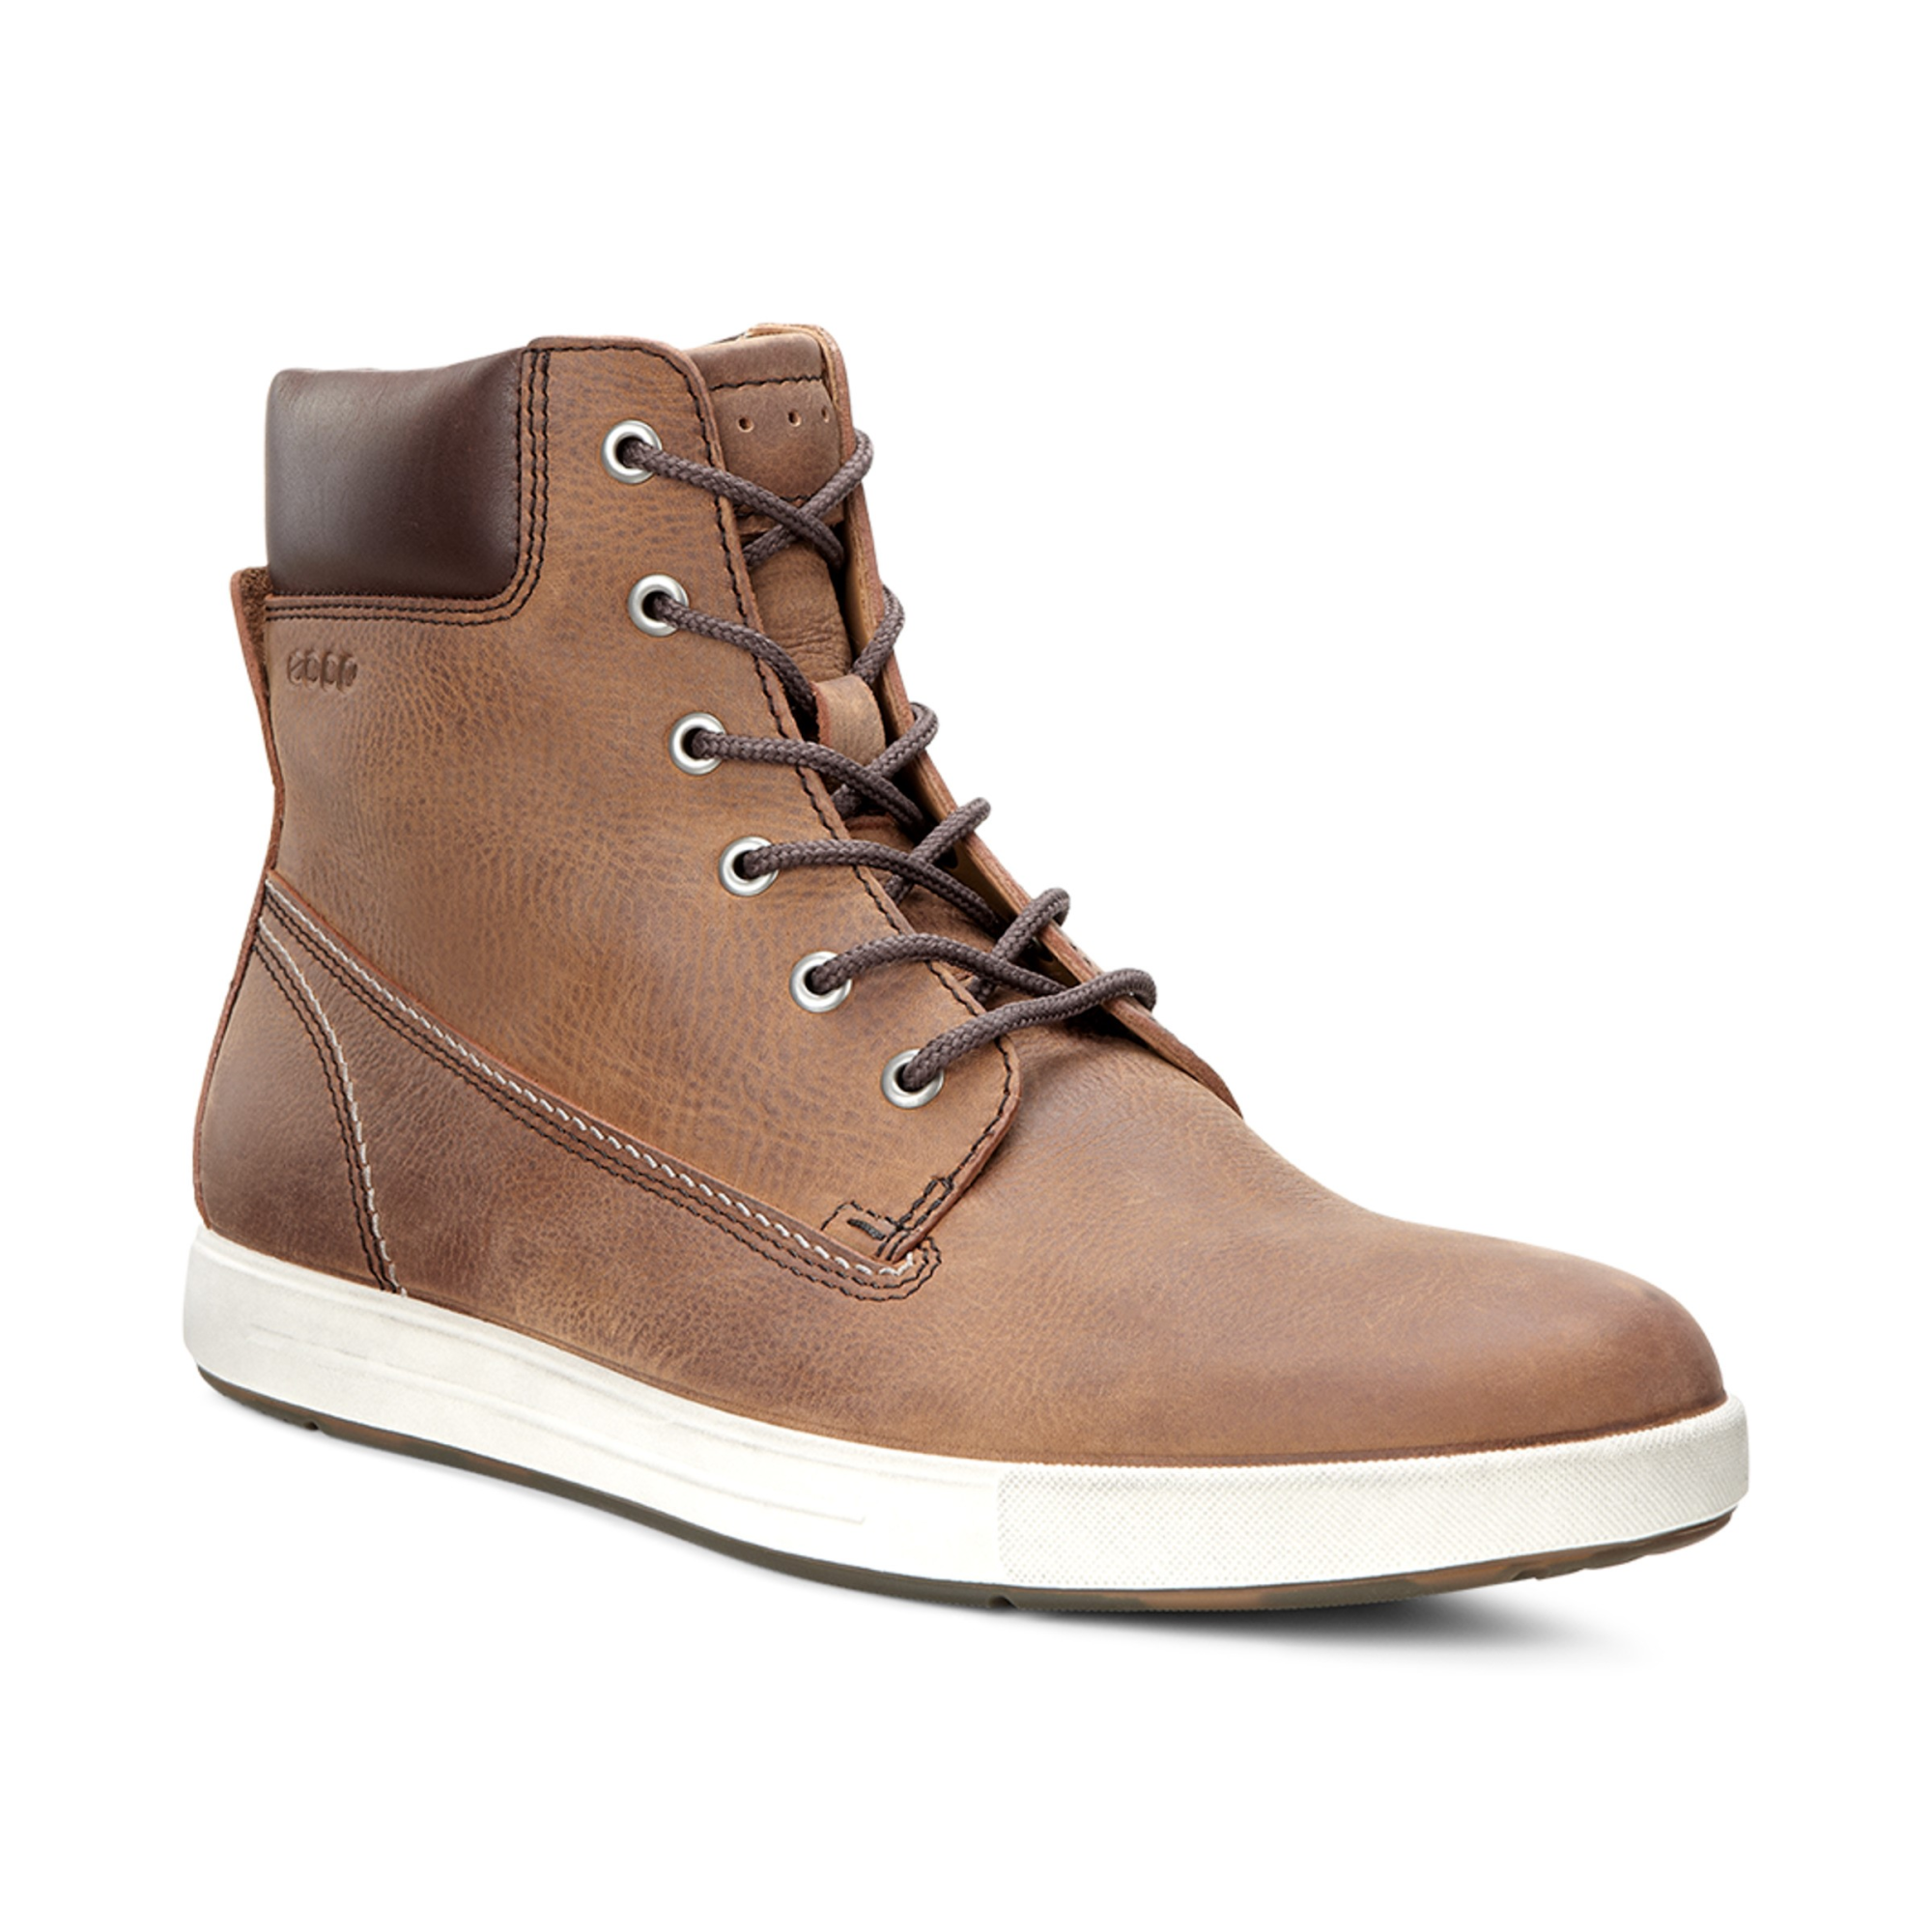 Ecco Eisner Boot 39 - Products Veryk Mall - Veryk Mall, many product, quick response, safe your money!